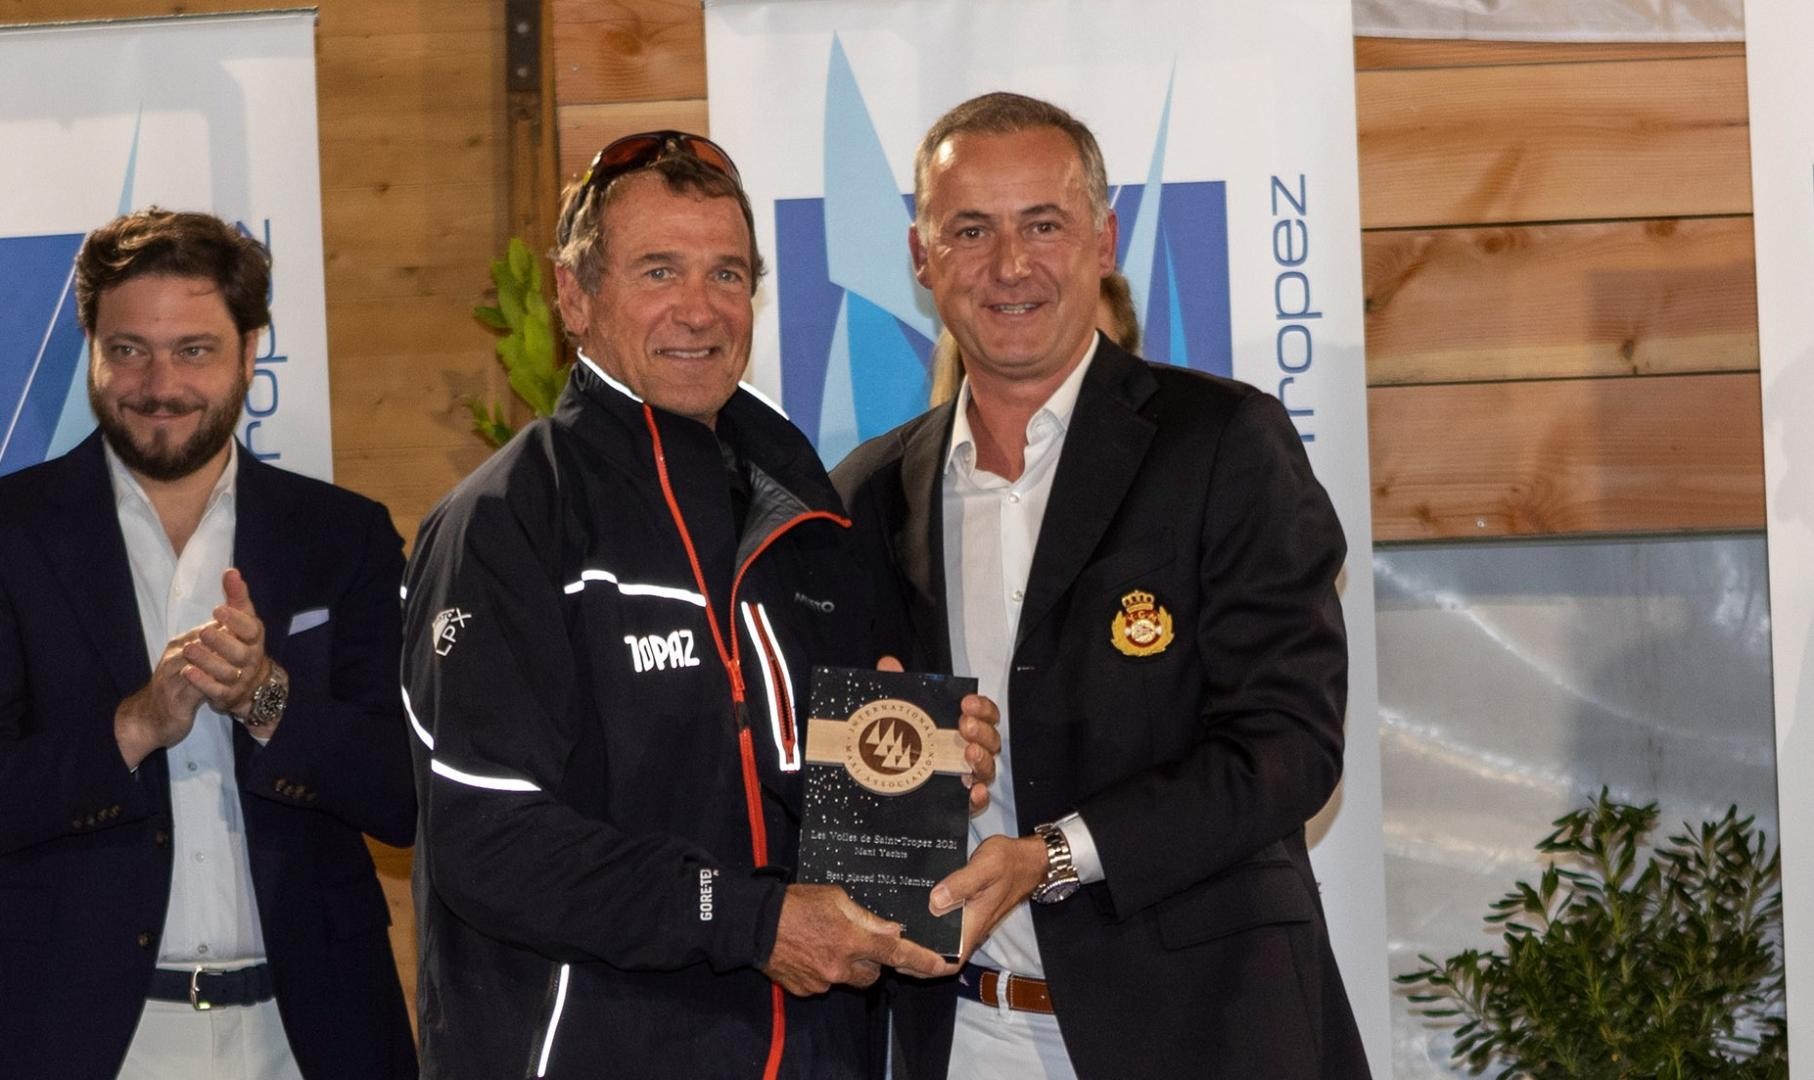 Peter Holmberg's accepts the prize for the 'top IMA boat' on behalf of Topaz. Photo: Gilles Martin-Raget / Les Voiles de Saint-Tropez